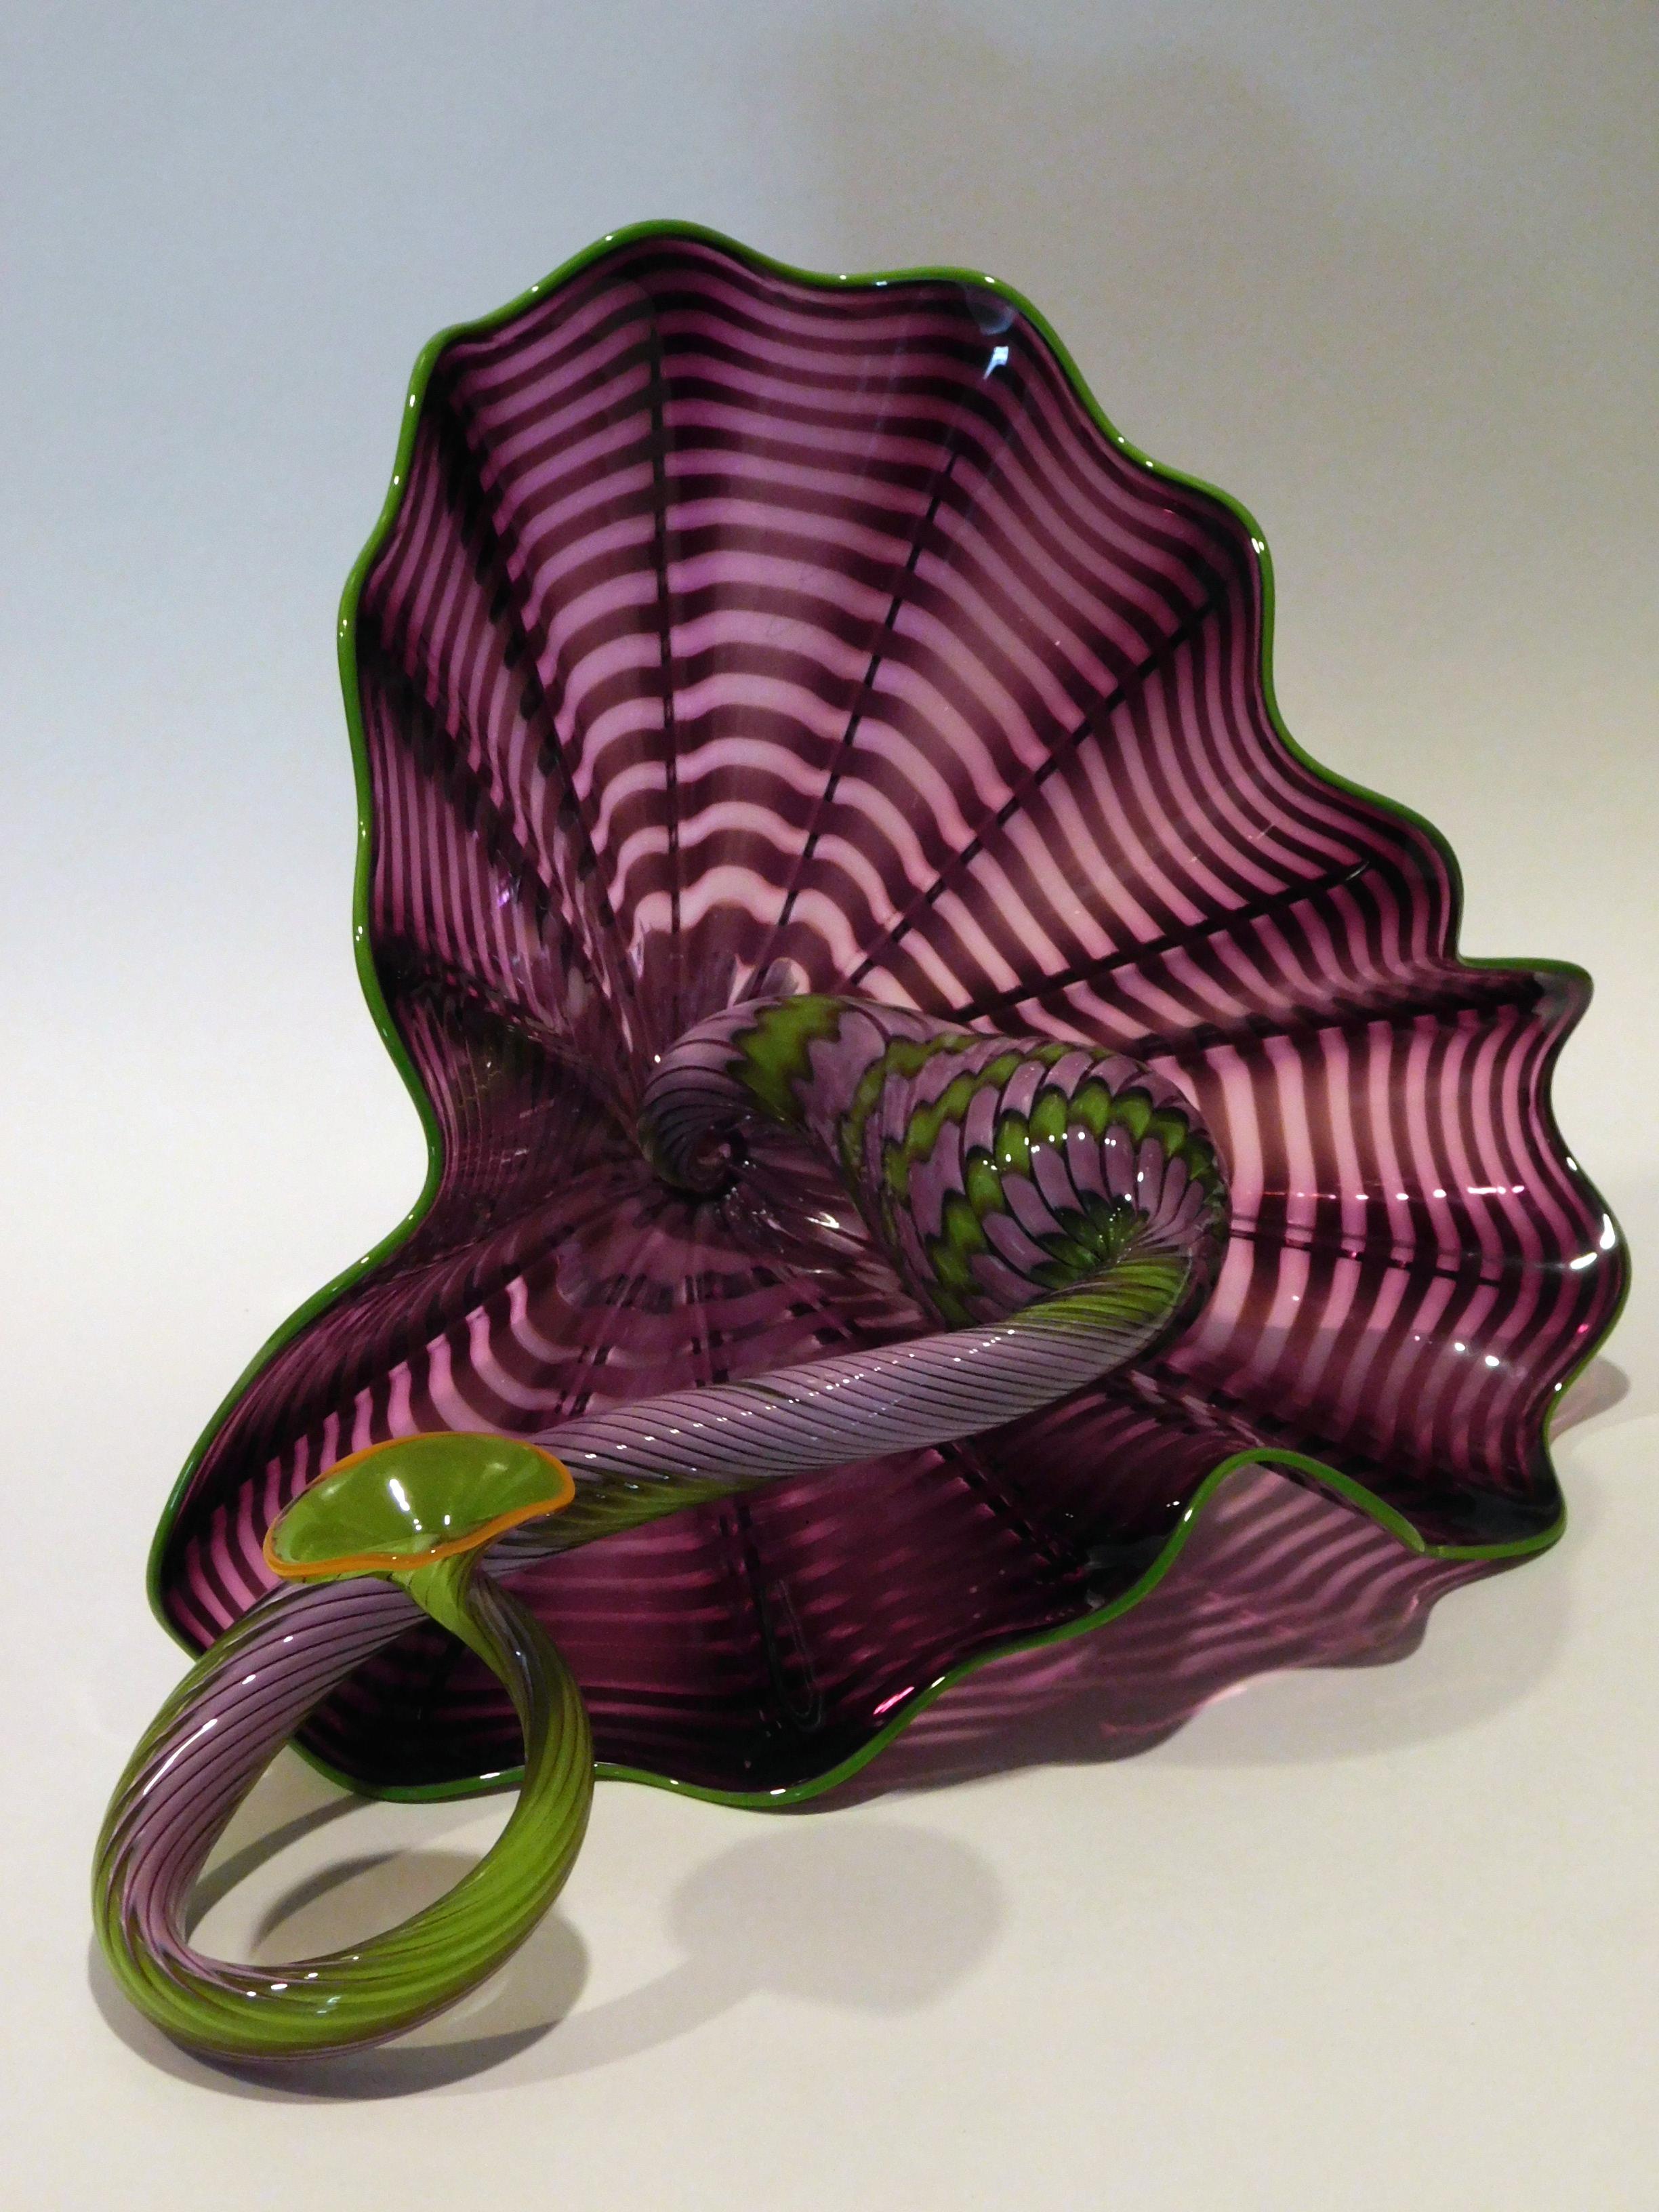 Dale Chihuly Amethyst 2 Piece Persian Set Handblown Glass Sculpture, 2005 1